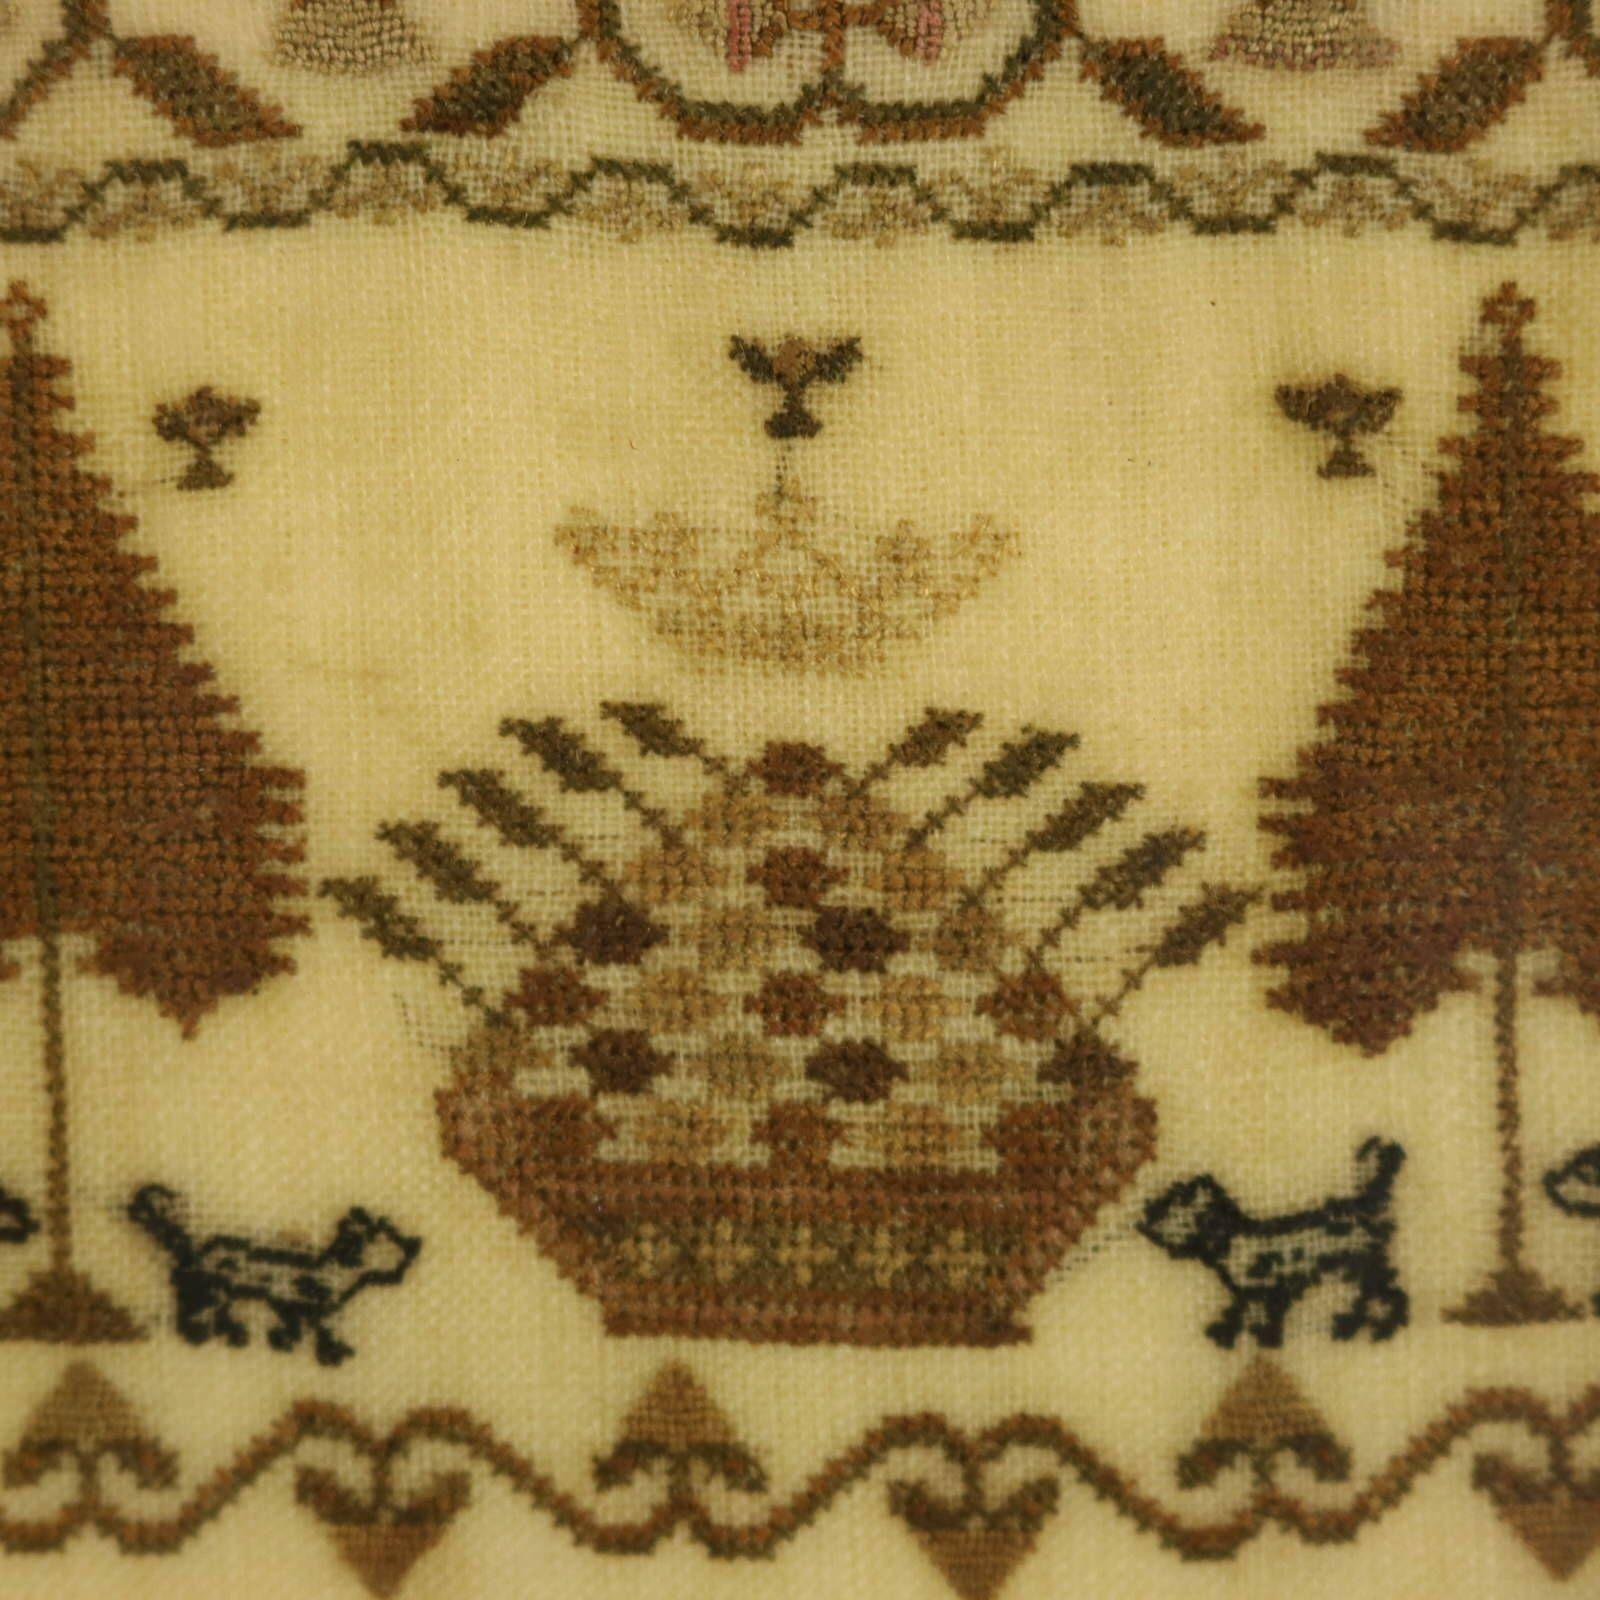 Antique Sampler, 1824, by Mary Richards aged 13 3